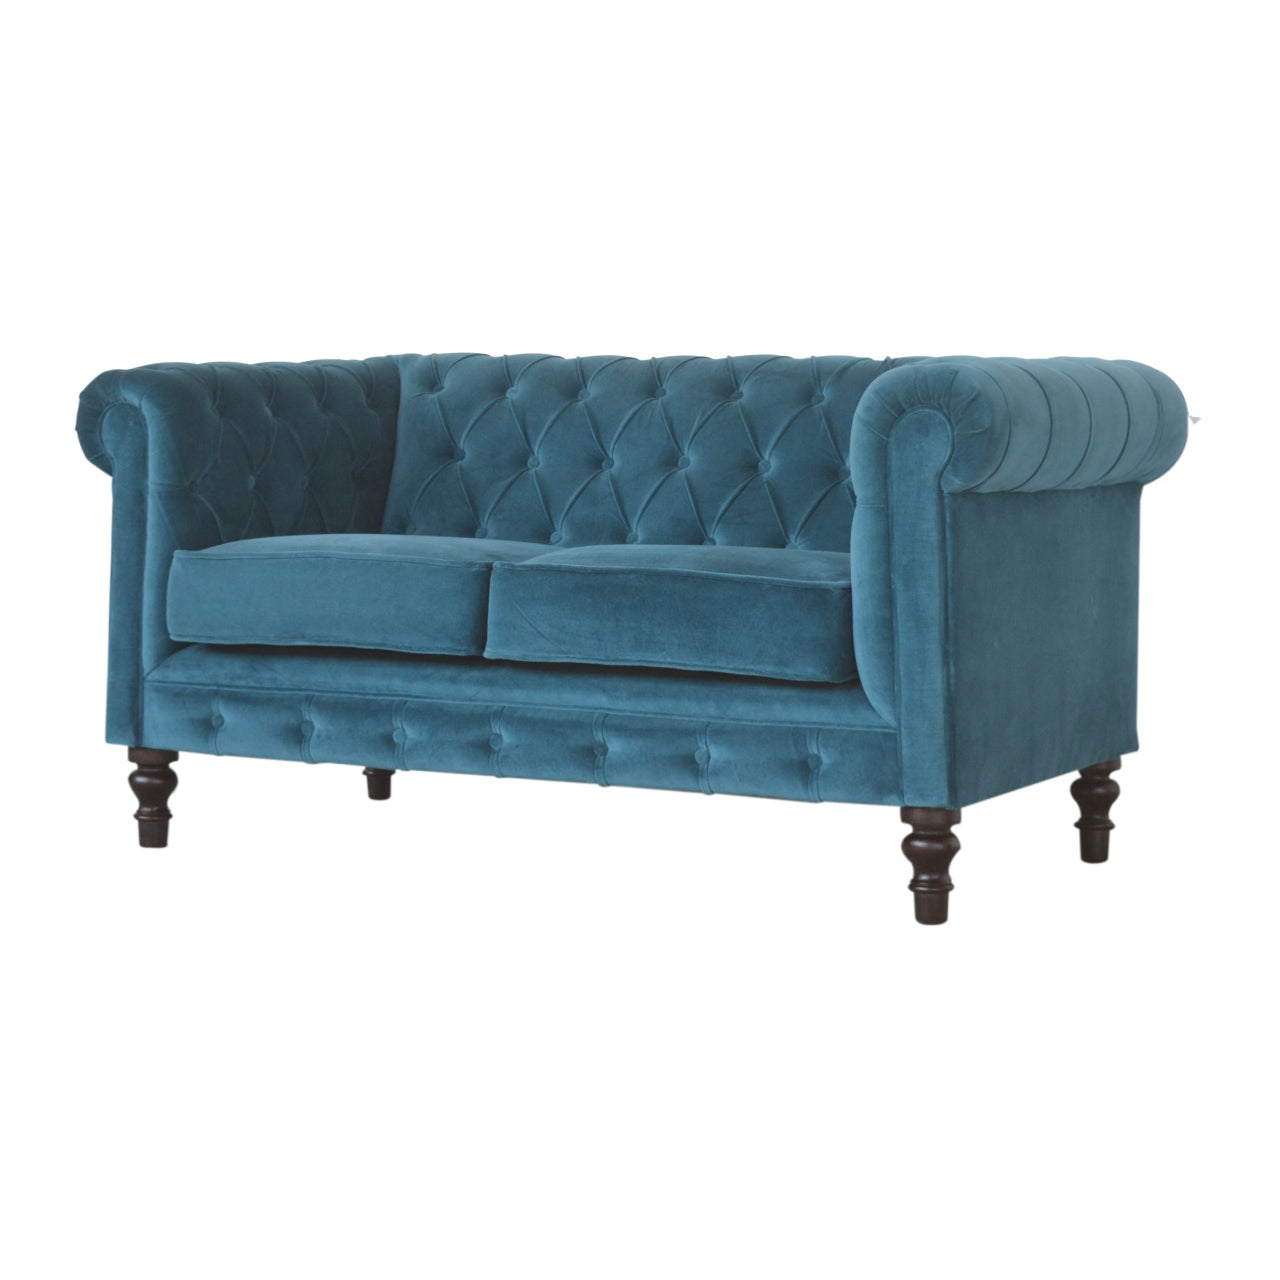 View Teal Chesterfield Sofa information